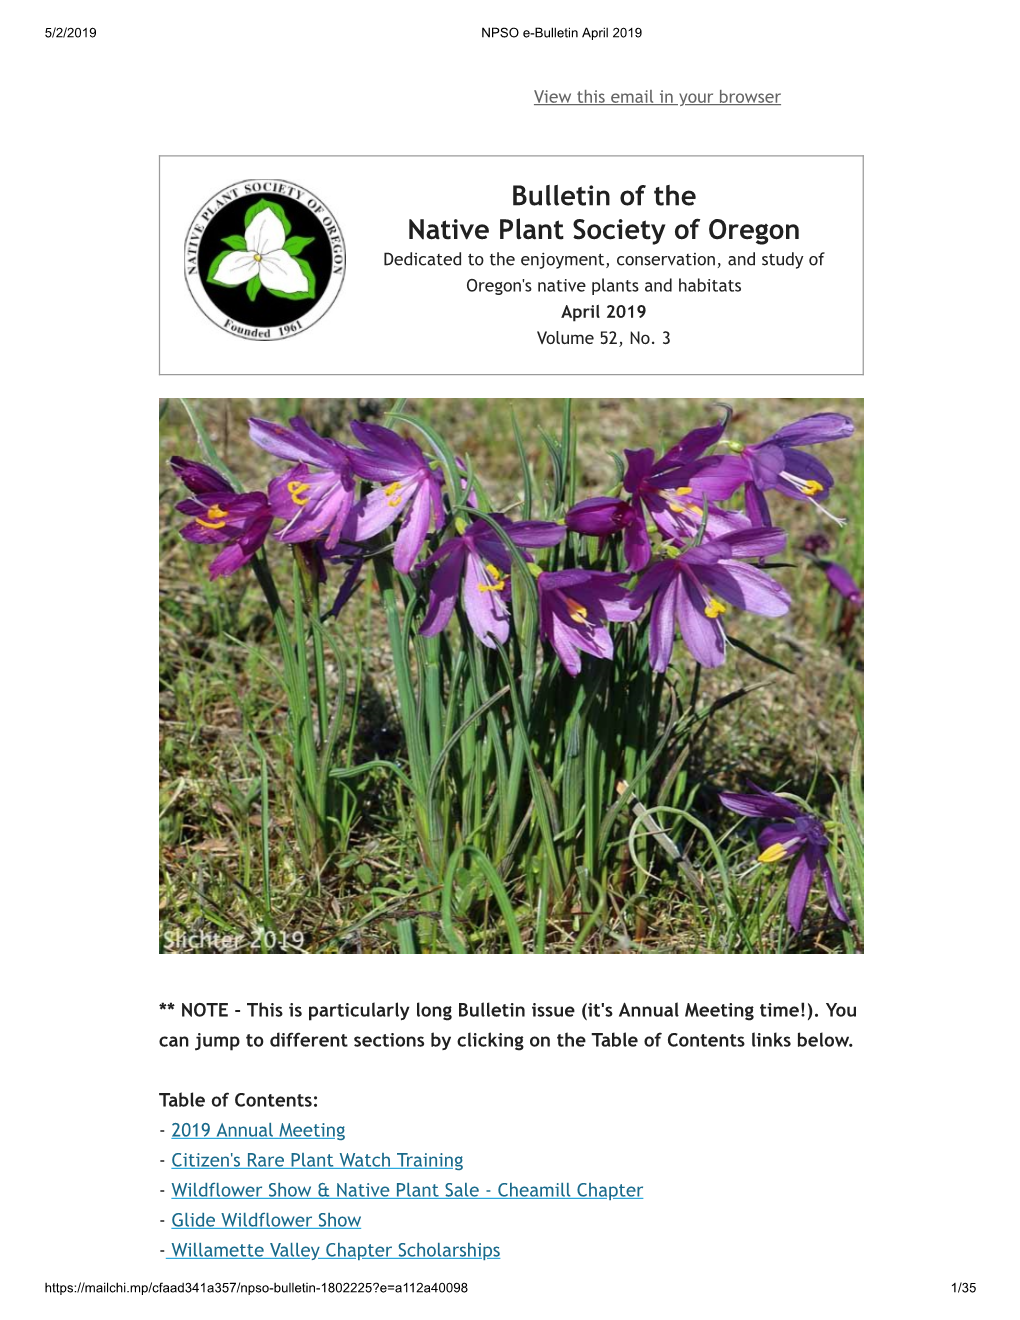 Bulletin of the Native Plant Society of Oregon Dedicated to the Enjoyment, Conservation, and Study of Oregon's Native Plants and Habitats April 2019 Volume 52, No